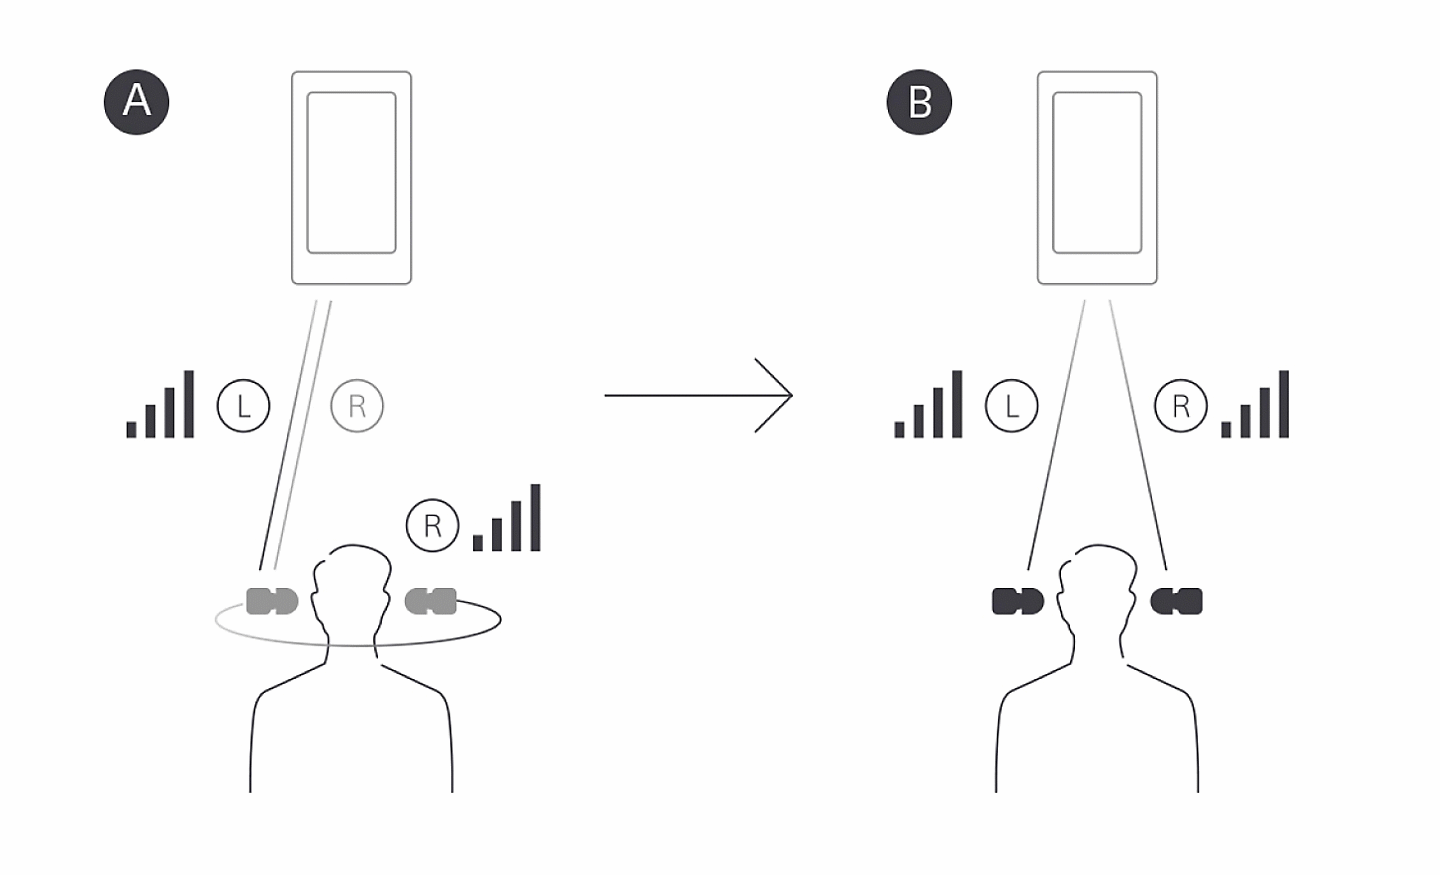 Illustration comparing L to R Relay BT Transmission on the WF-1000X headphones with  L/R Simultaneous BT Transmission on the WF-1000XM4